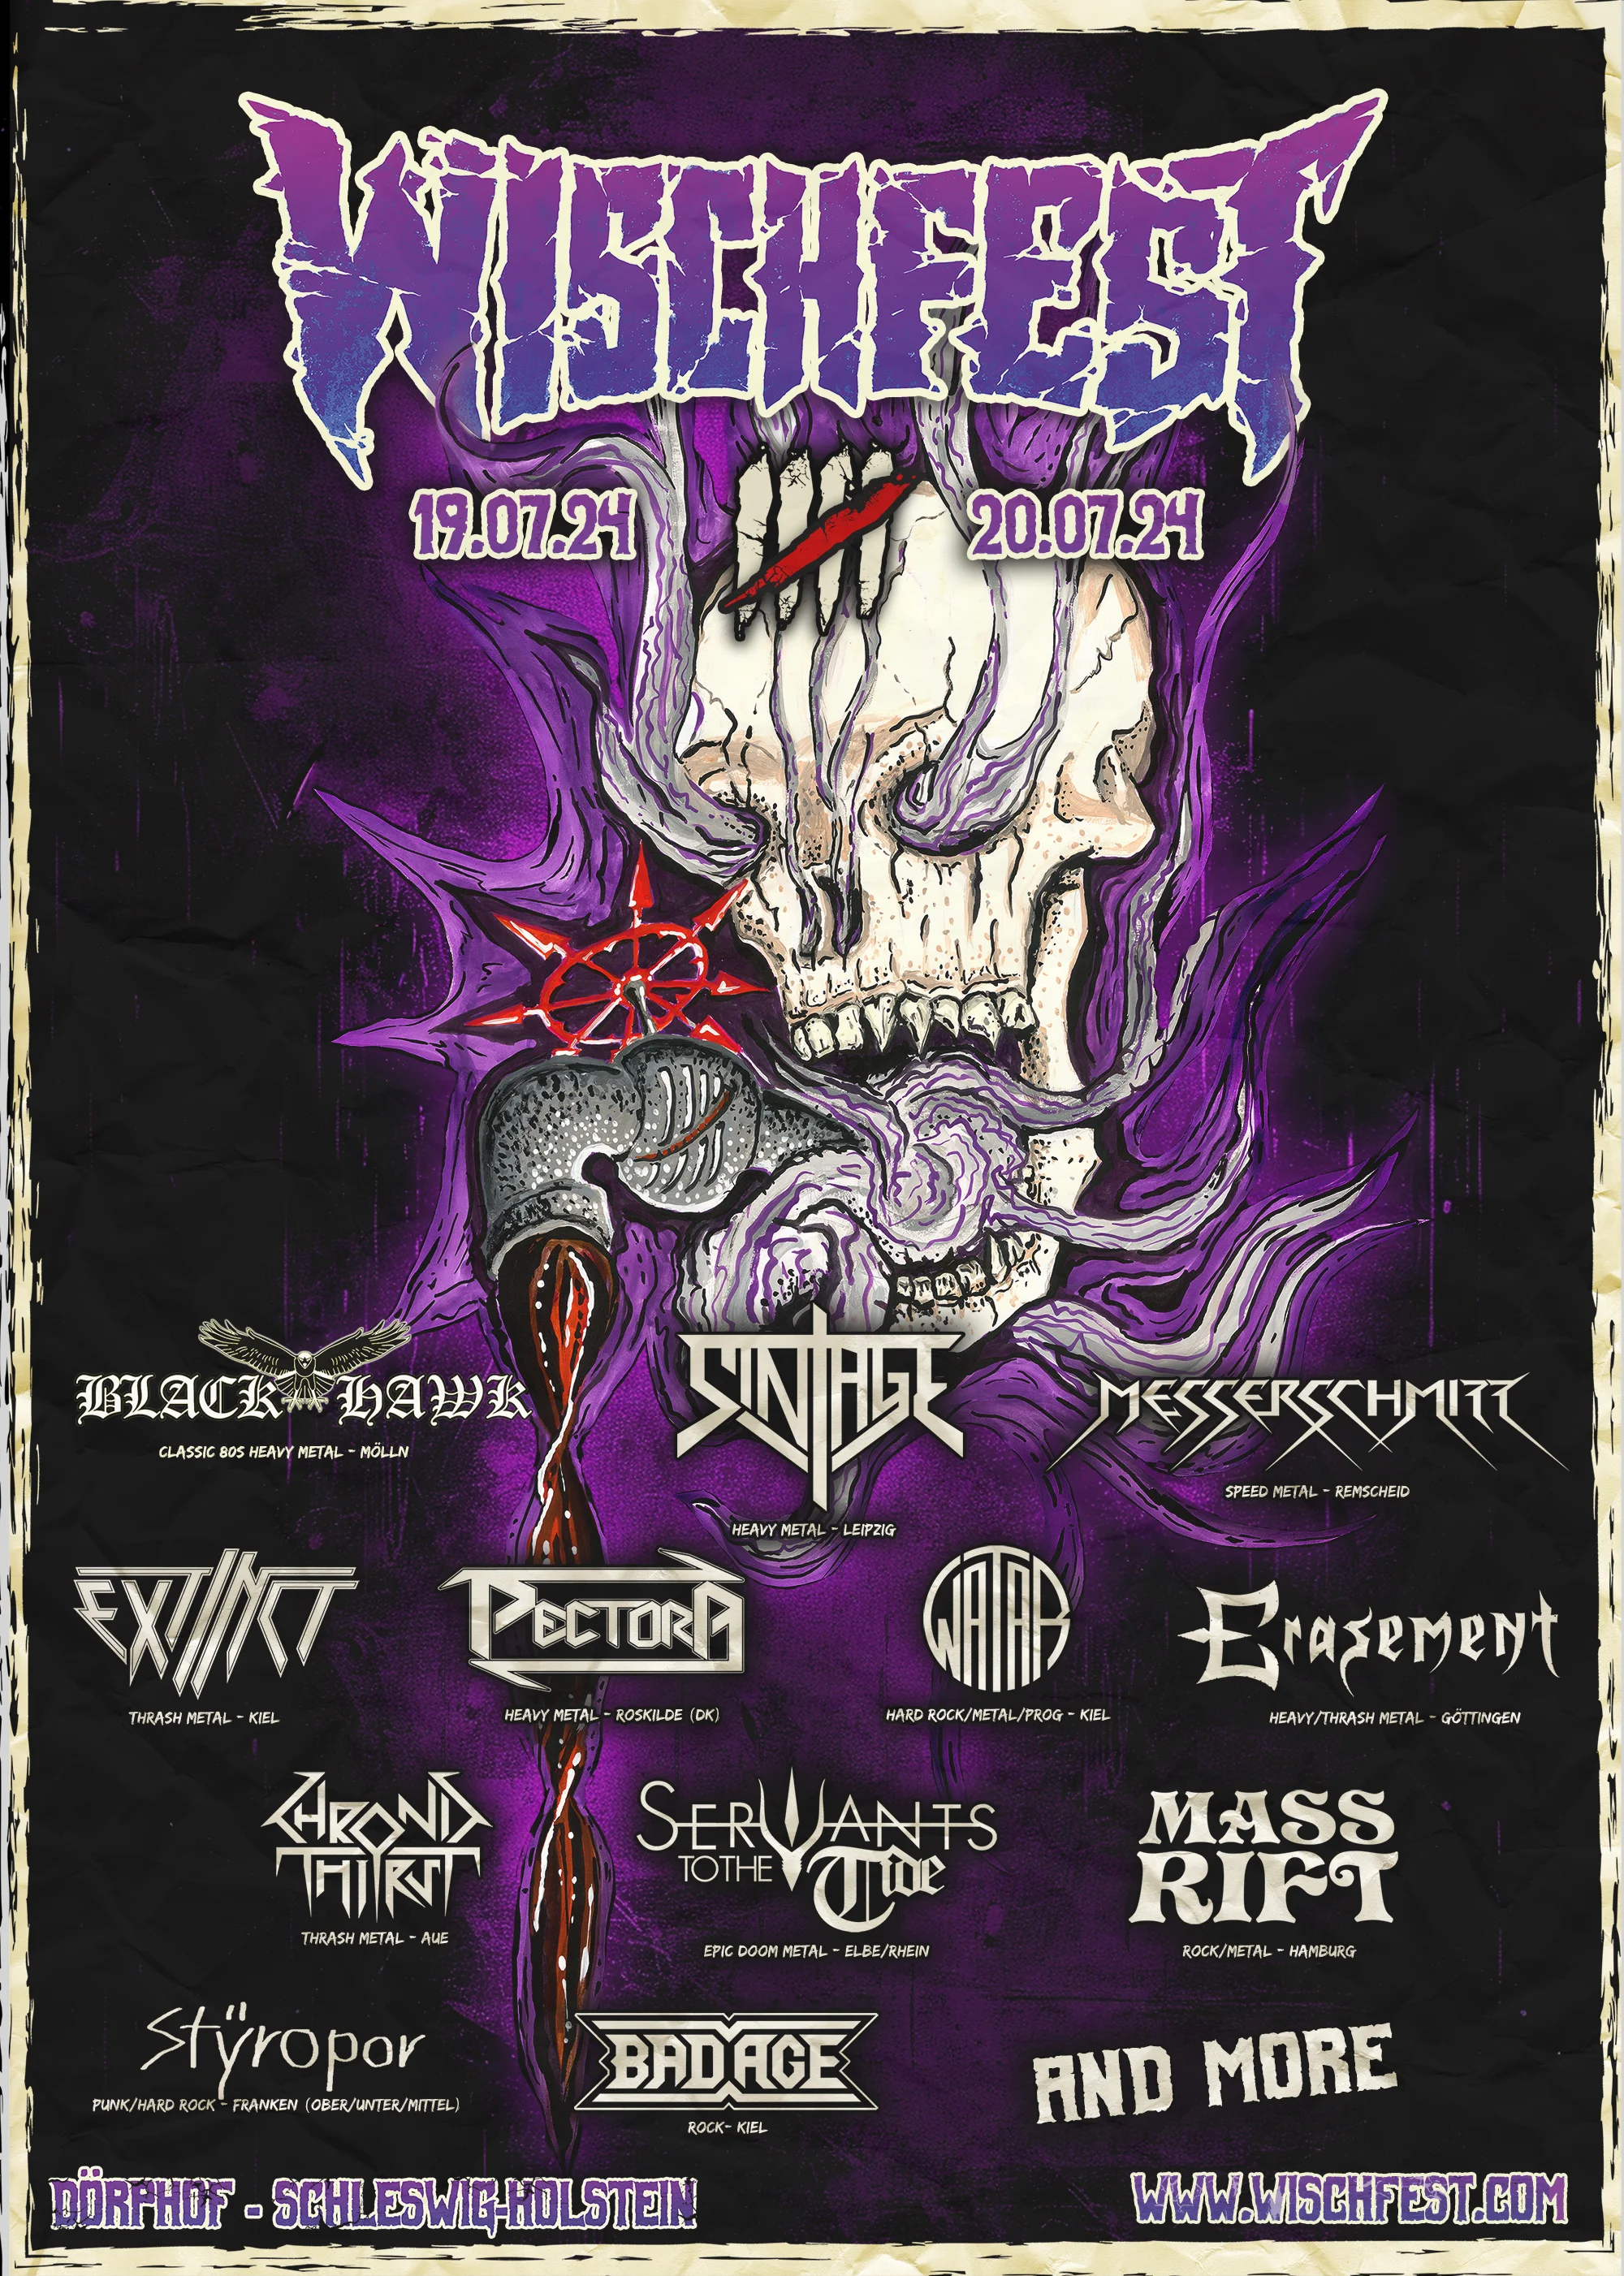 The Wischfest 5 poster (a human skull surrounded by violetish flames and smoke. In it's mouth sits a tap from which flows dark red liquid).
At the bottom half of the Flyer are the band logos of 12 bands (Black Hawk, Sintage, Messerschmitt, Extinct, Pectora, Watar, Erasement, Chronic Thirst, Servants to the Tide, Mass Rift, Styropor, Bad Age).
Plus a "and more"